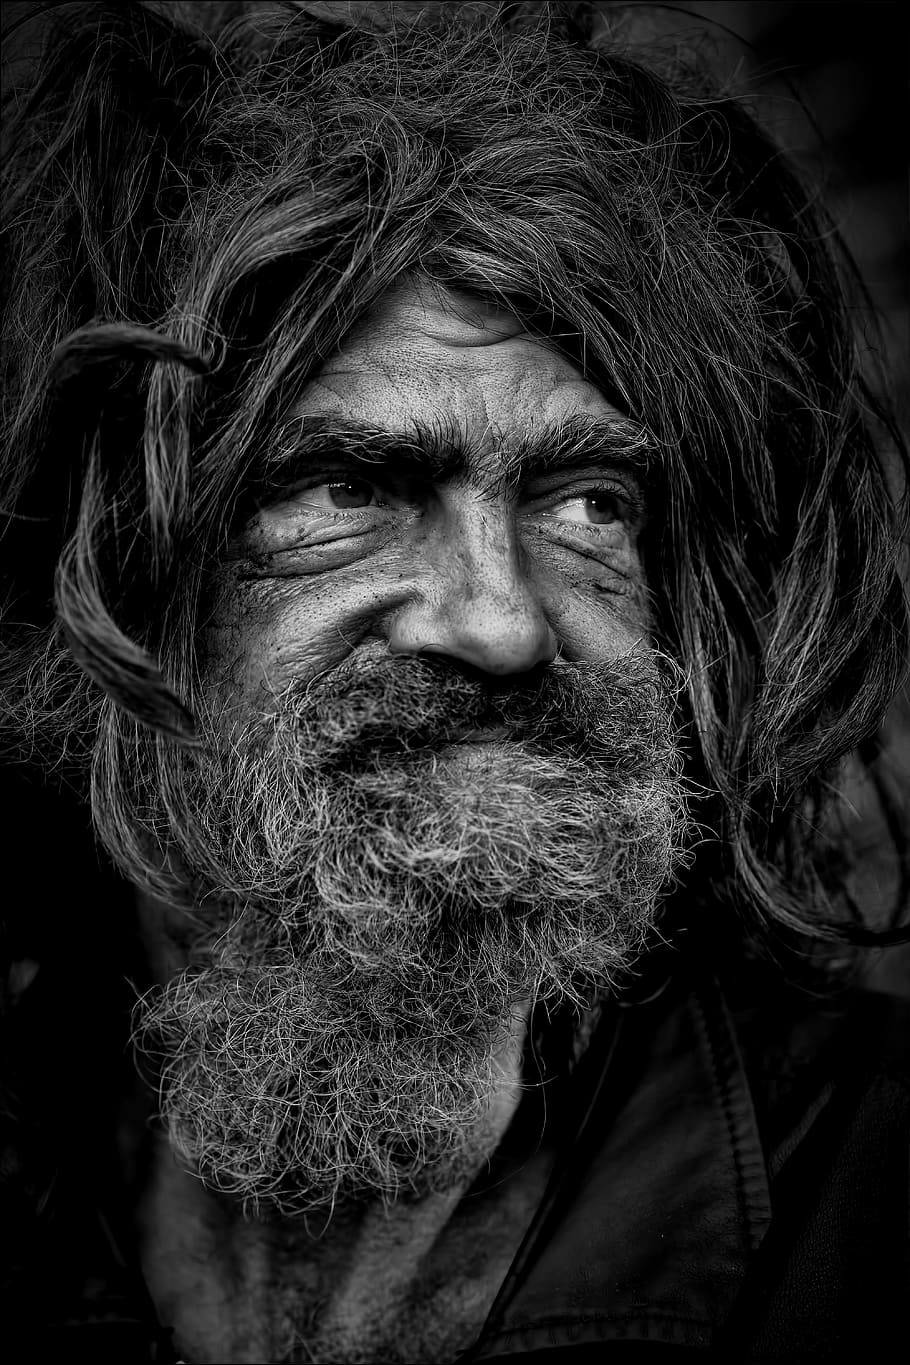 bearded, man portrait grayscale photo, people, homeless, m, person, poverty, homelessness, male, homeless man